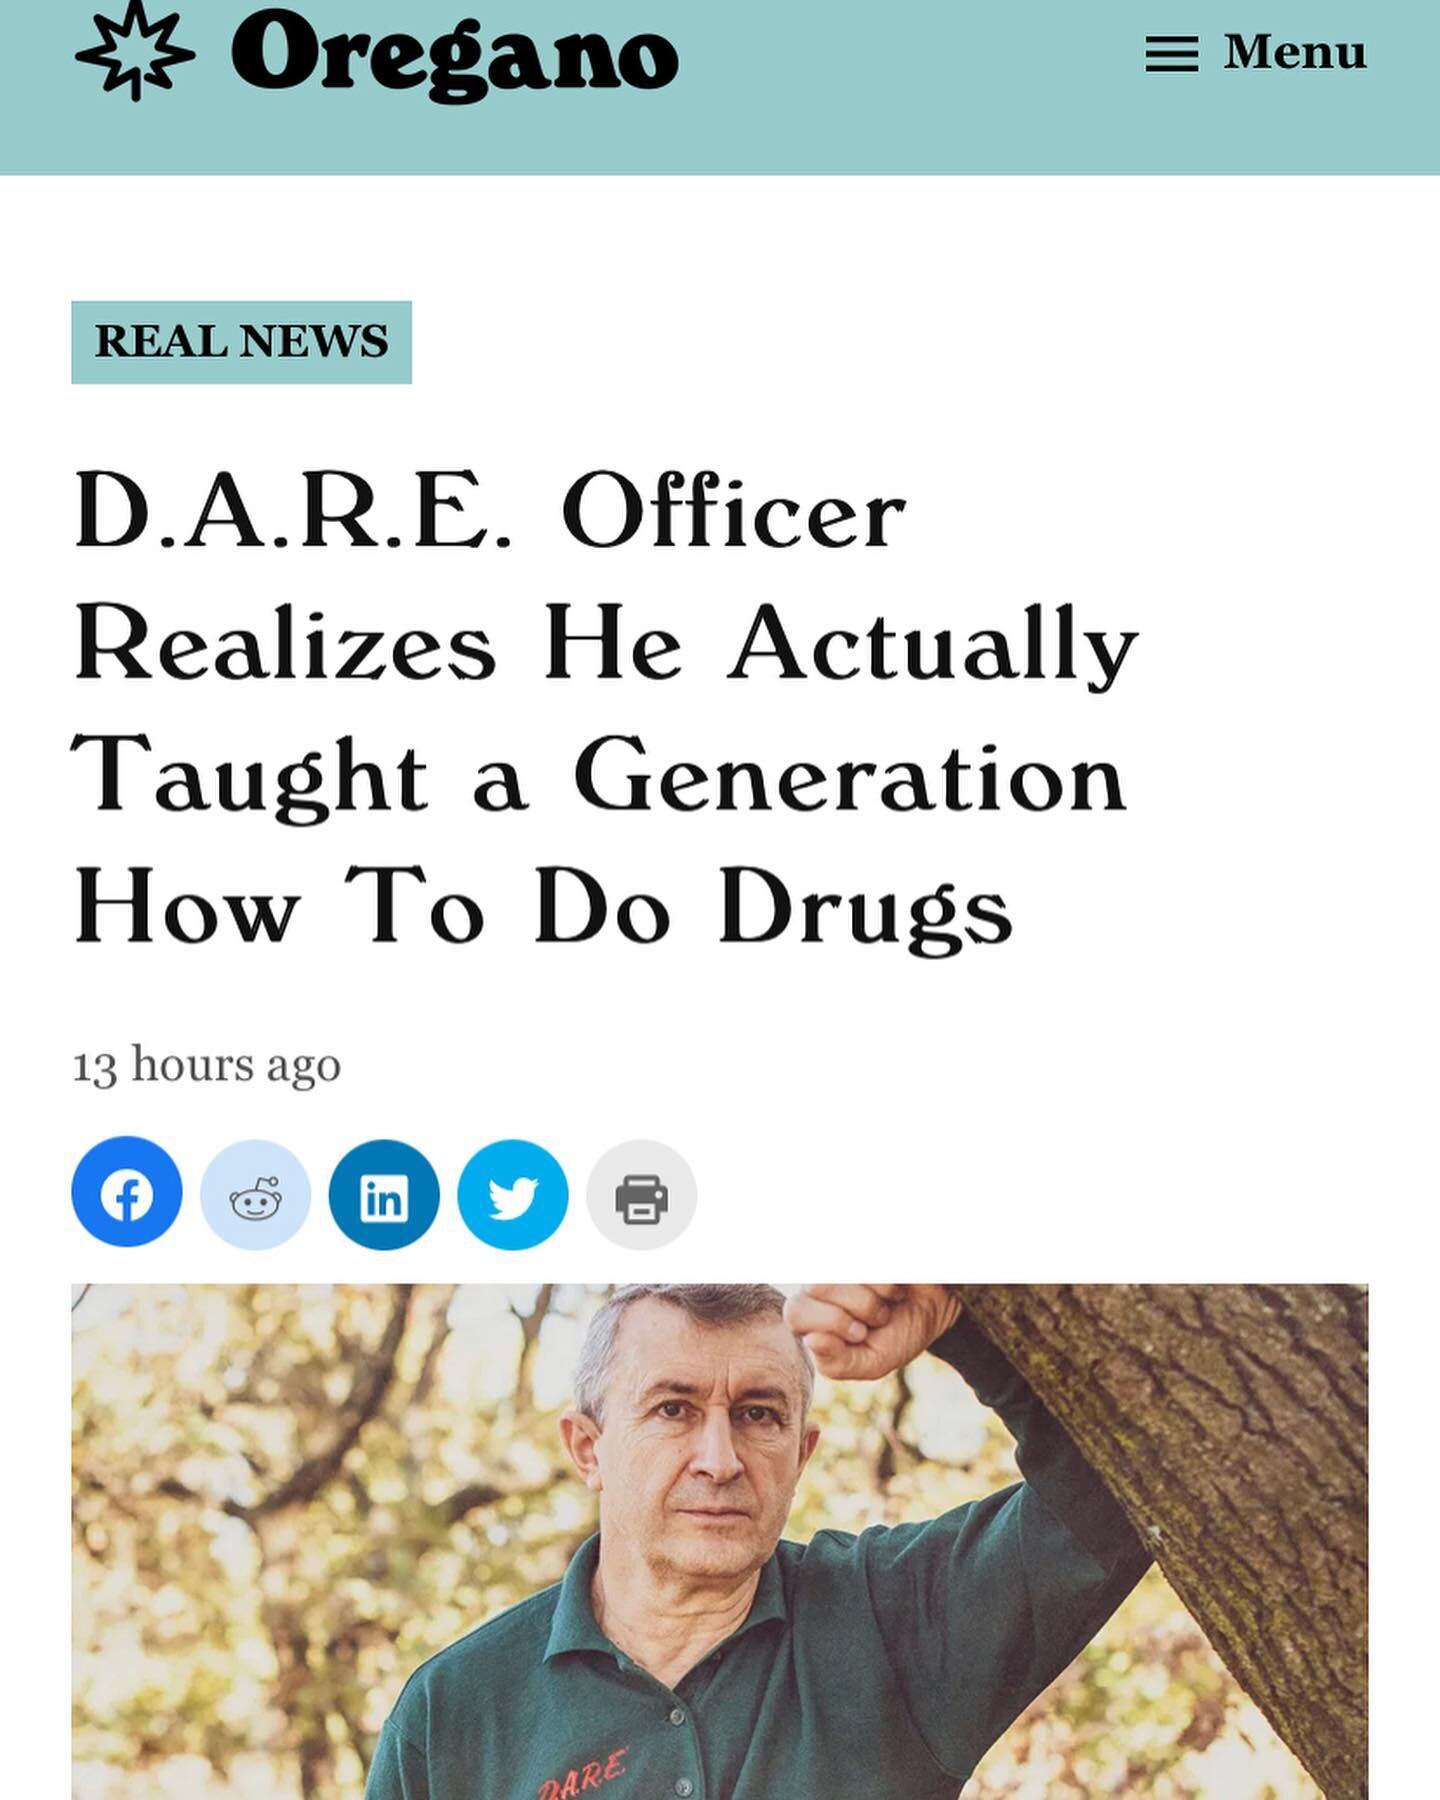 Like if you had D.A.R.E. when you were a kid. SHARE if my dad was your  D.A.R.E. Officer. 

You can read and share the full article at oregano.com 

#satire #dare #dareofficer #lastprisoner